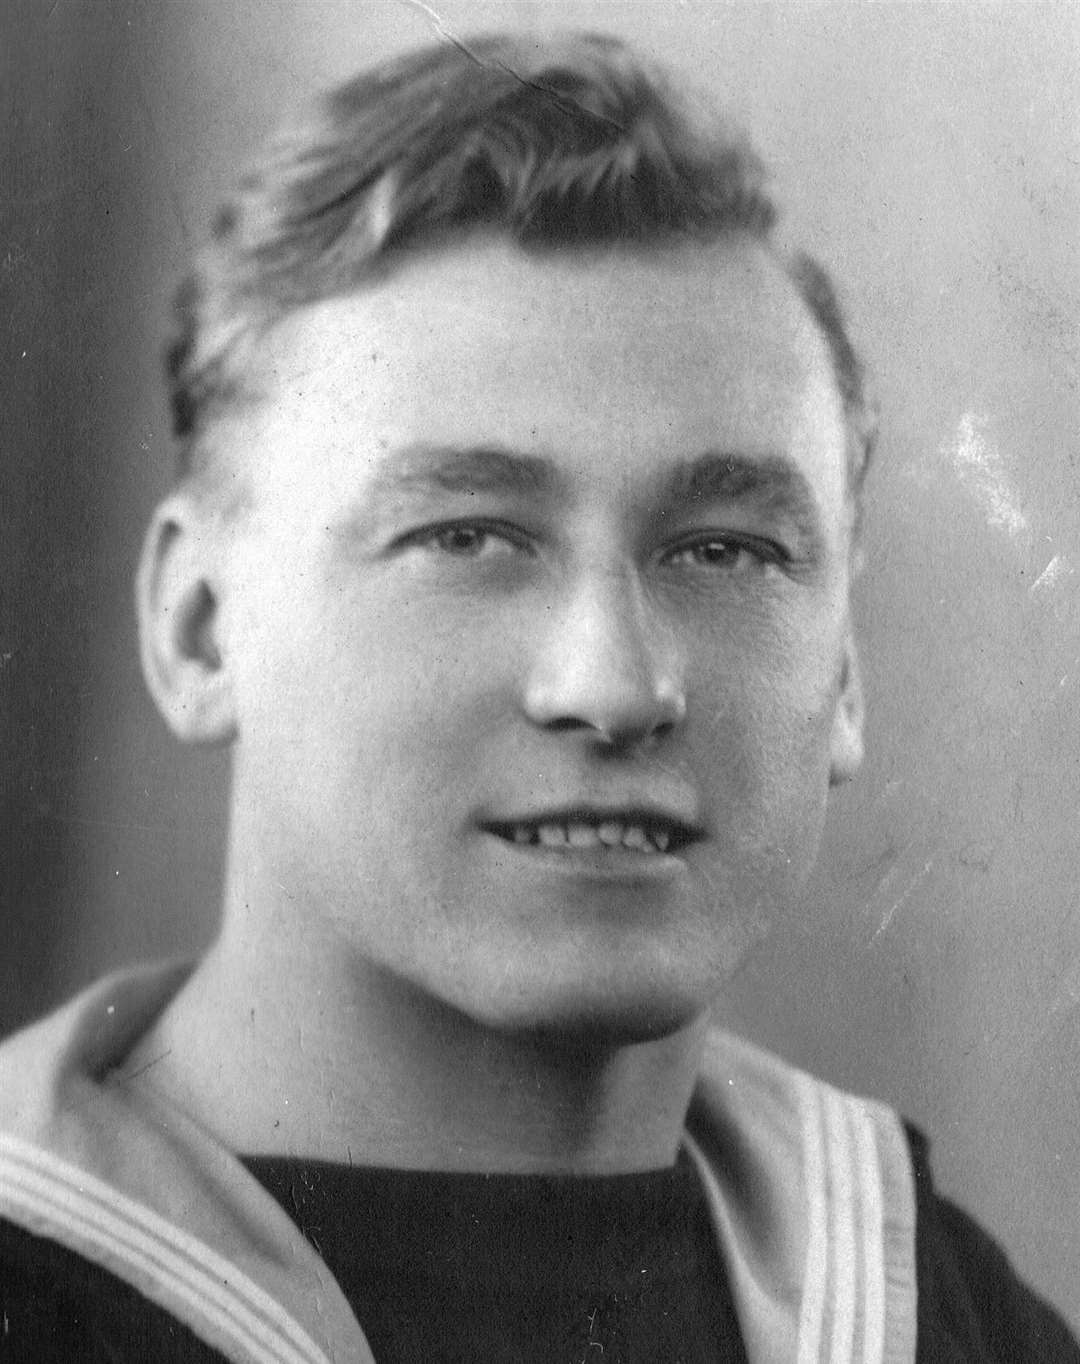 John Lawrence joined the Royal Navy when he was just 15 and played a key role in the Second World War